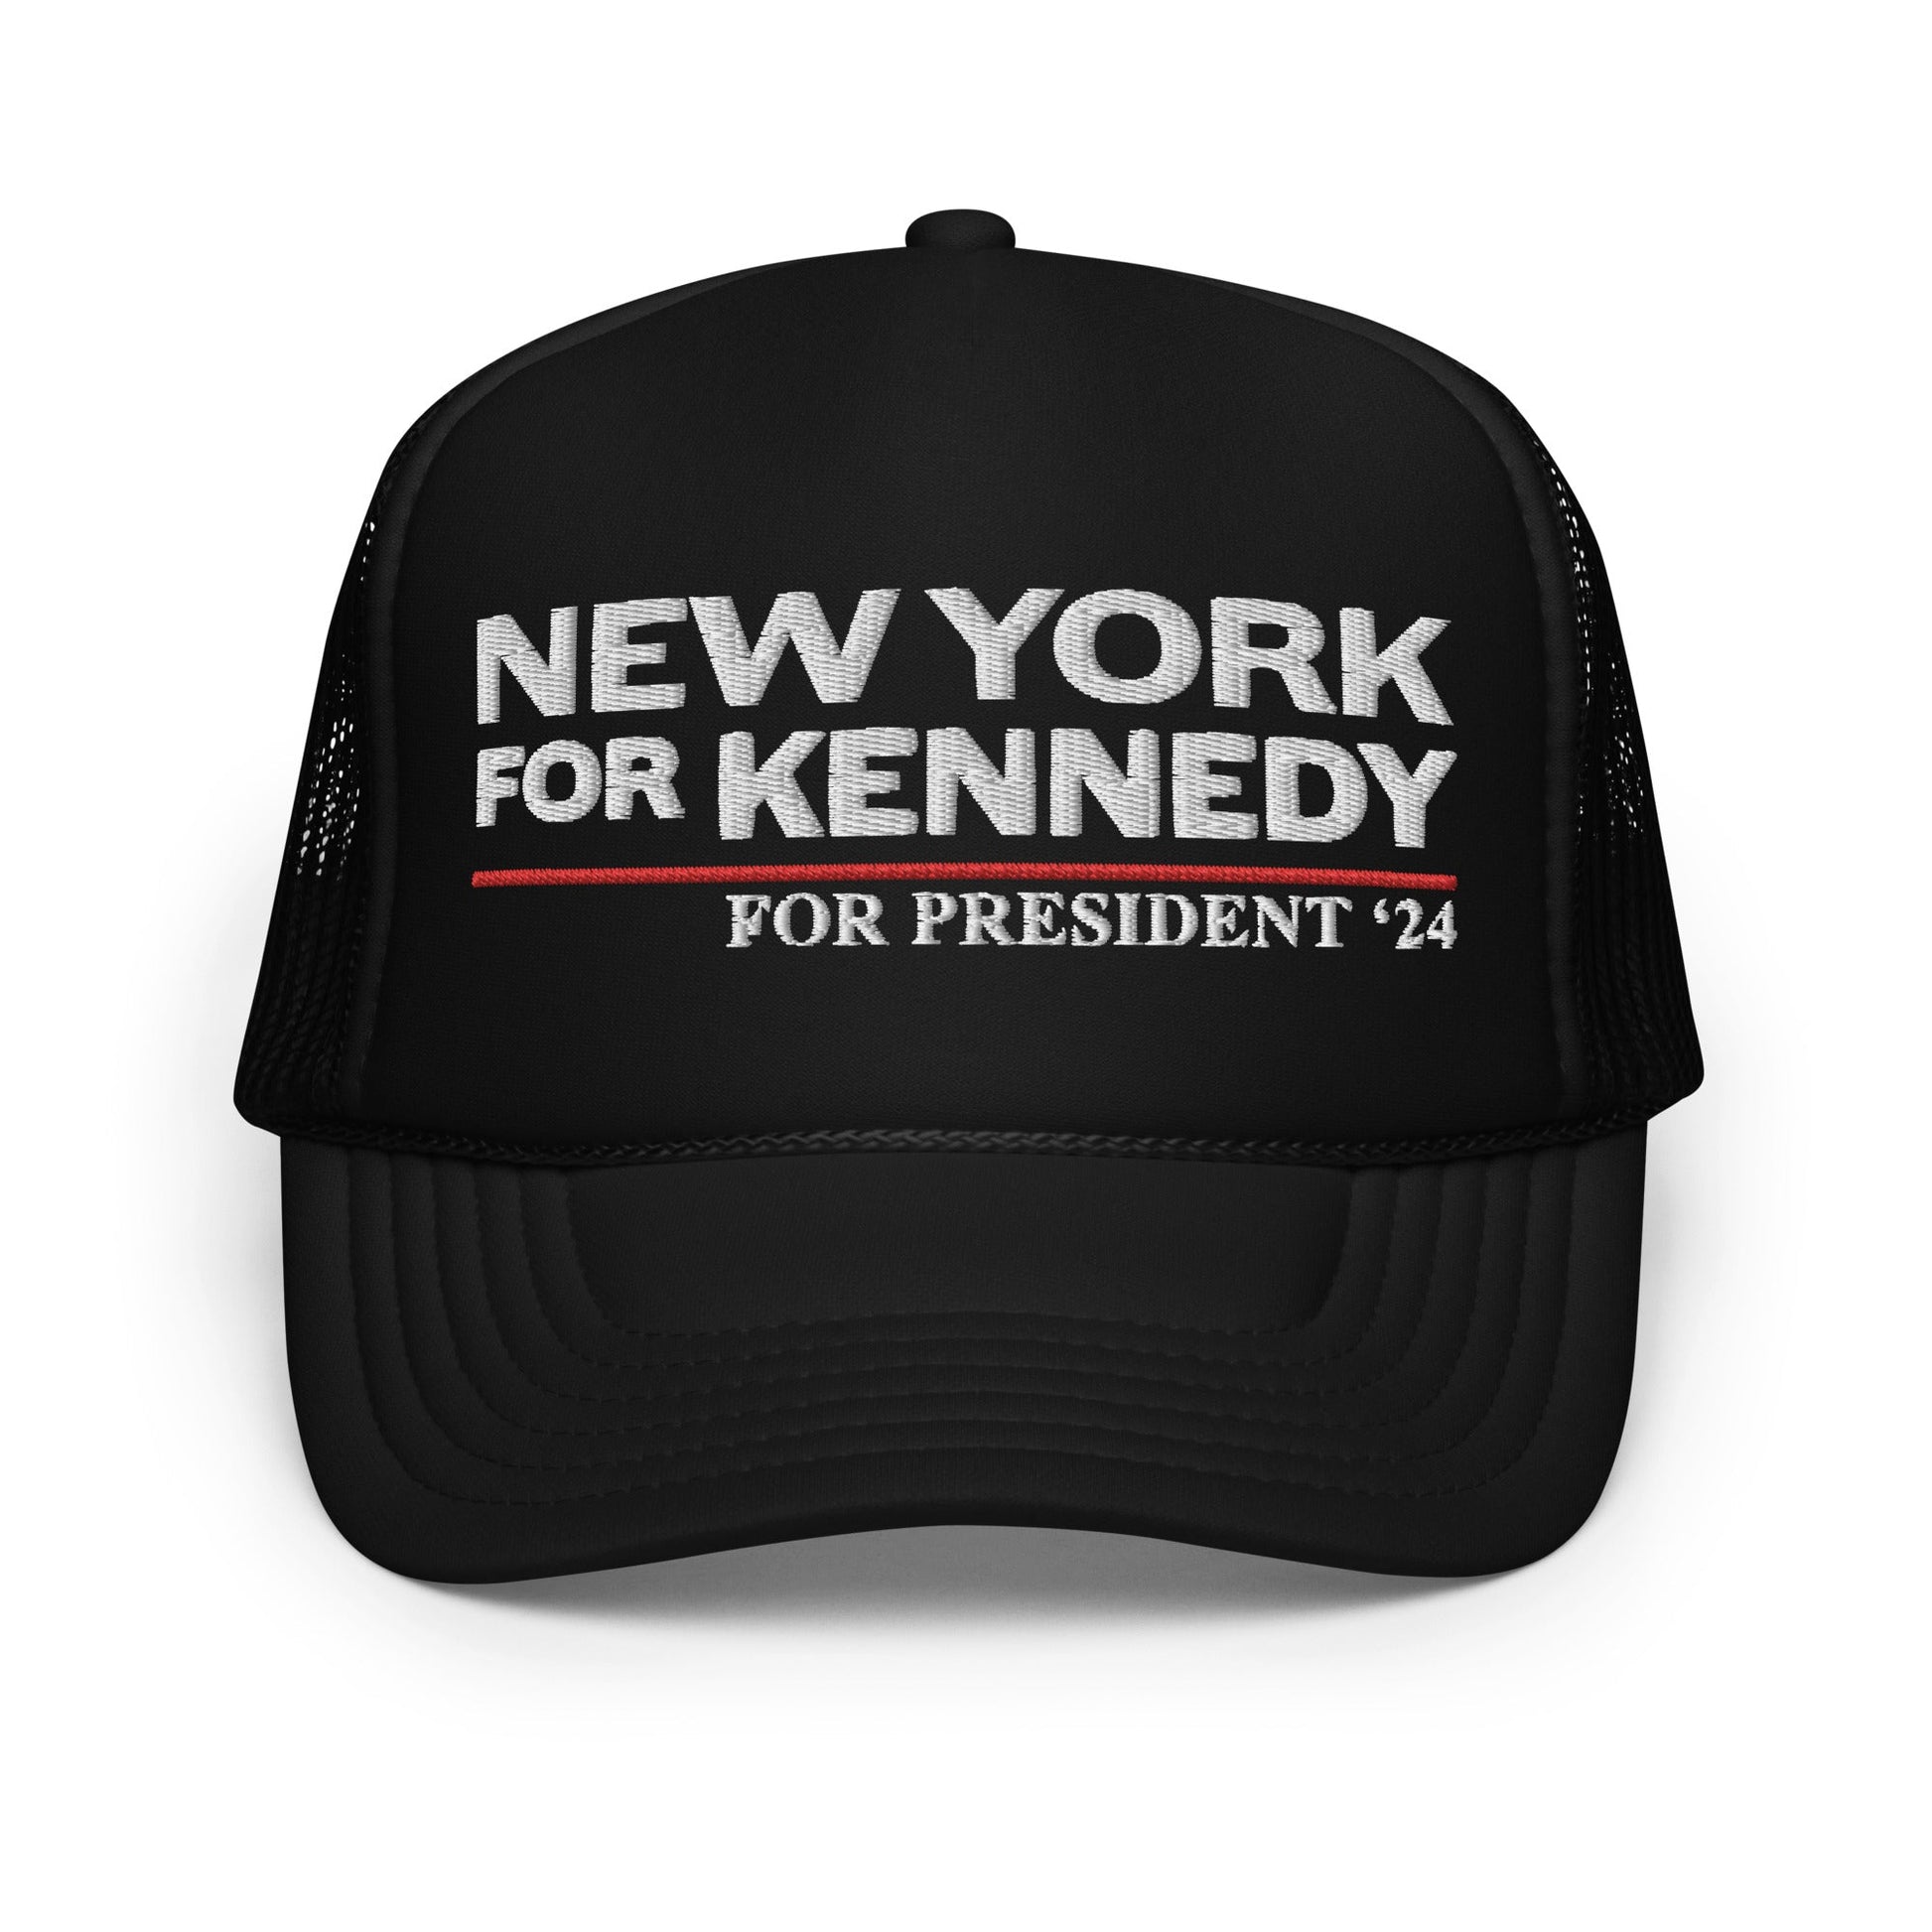 New York for Kennedy Foam Trucker Hat - TEAM KENNEDY. All rights reserved